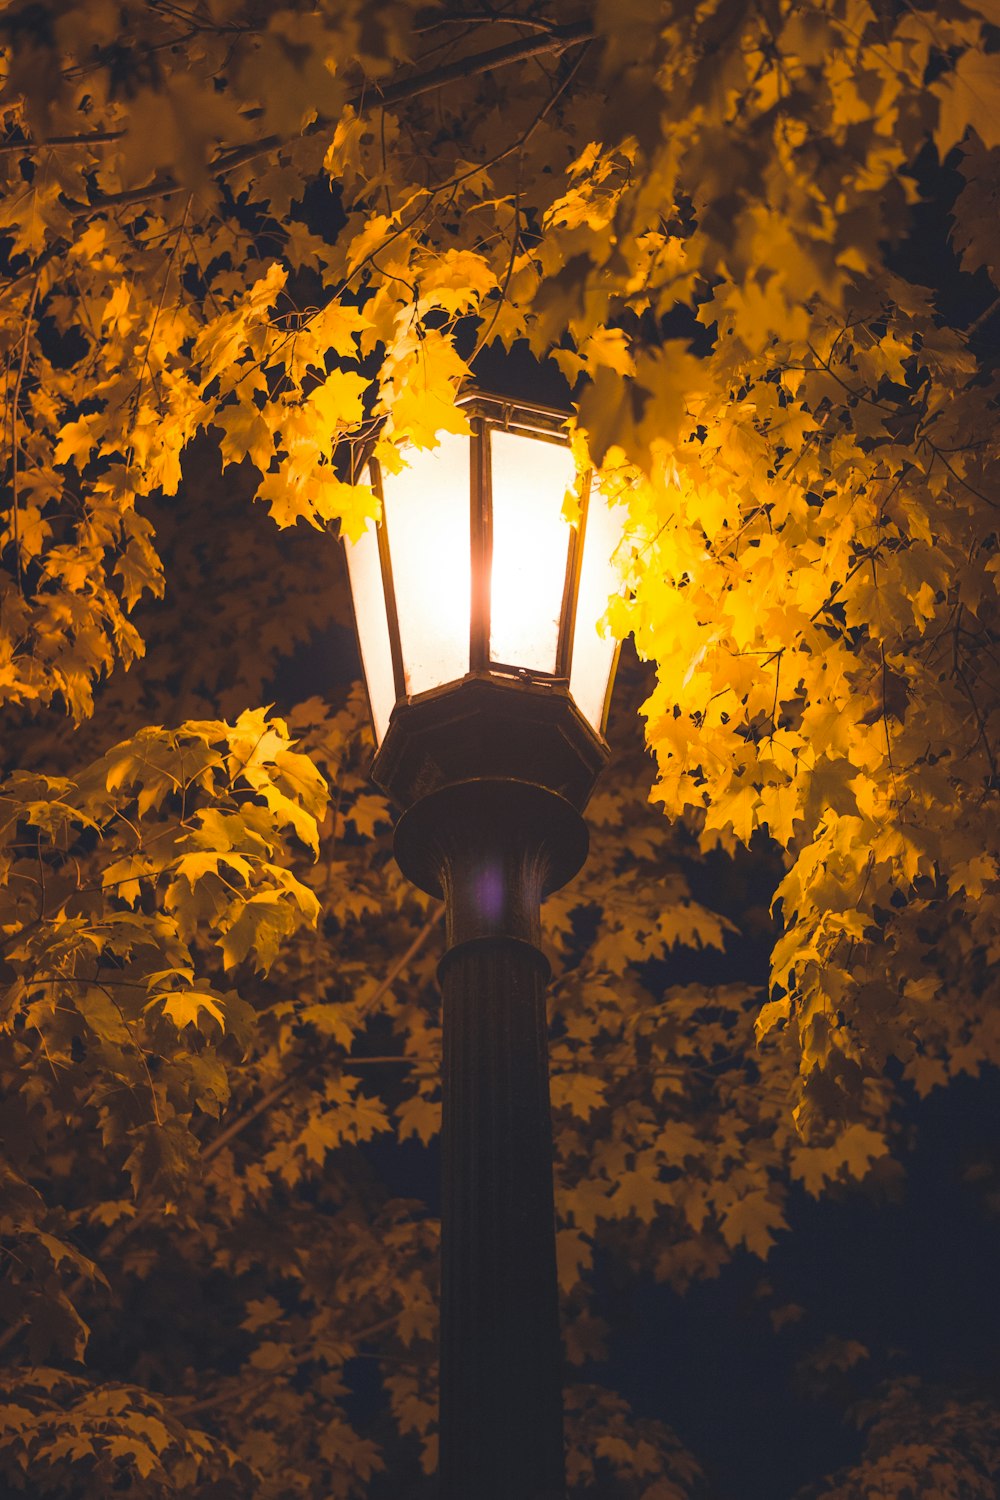 a street light in front of a tree with yellow leaves